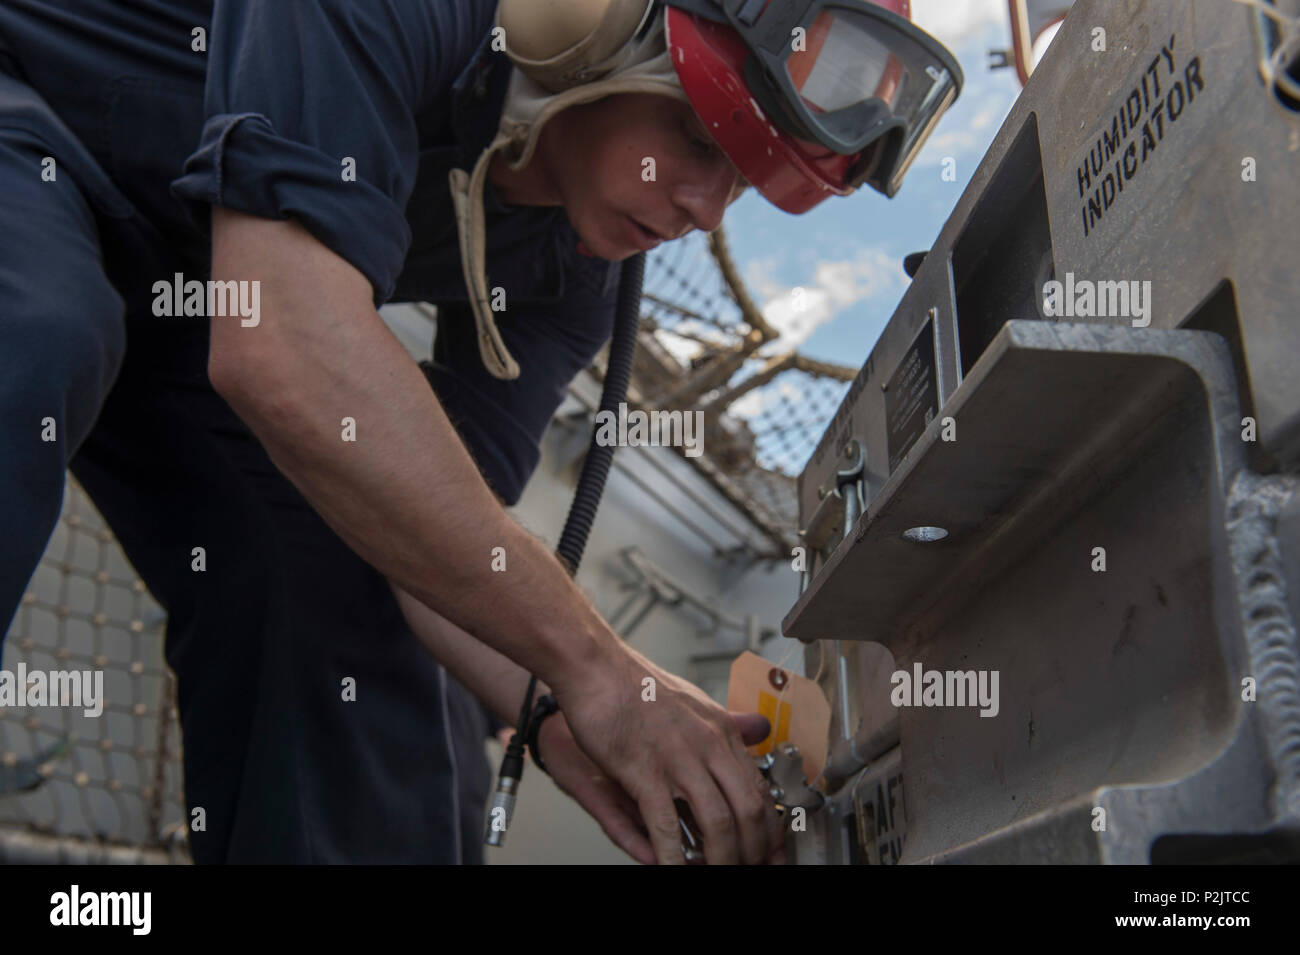 160903-N-KR961-066 PACIFIC OCEAN (Sept. 03, 2016) Aviation Ordnanceman 1st Class Ryan Heeney secures a RIM-116 Rolling Airframe Missile ammunition container aboard amphibious assault ship USS Boxer (LHD 4). Boxer, flagship for the Boxer Amphibious Ready Group, 13th Marine Expeditionary Unit team, is operating in the U.S. 3rd Fleet area of operations. (U. S. Navy photo by Mass Communication Specialist 2nd Class Debra Daco/Released) Stock Photo